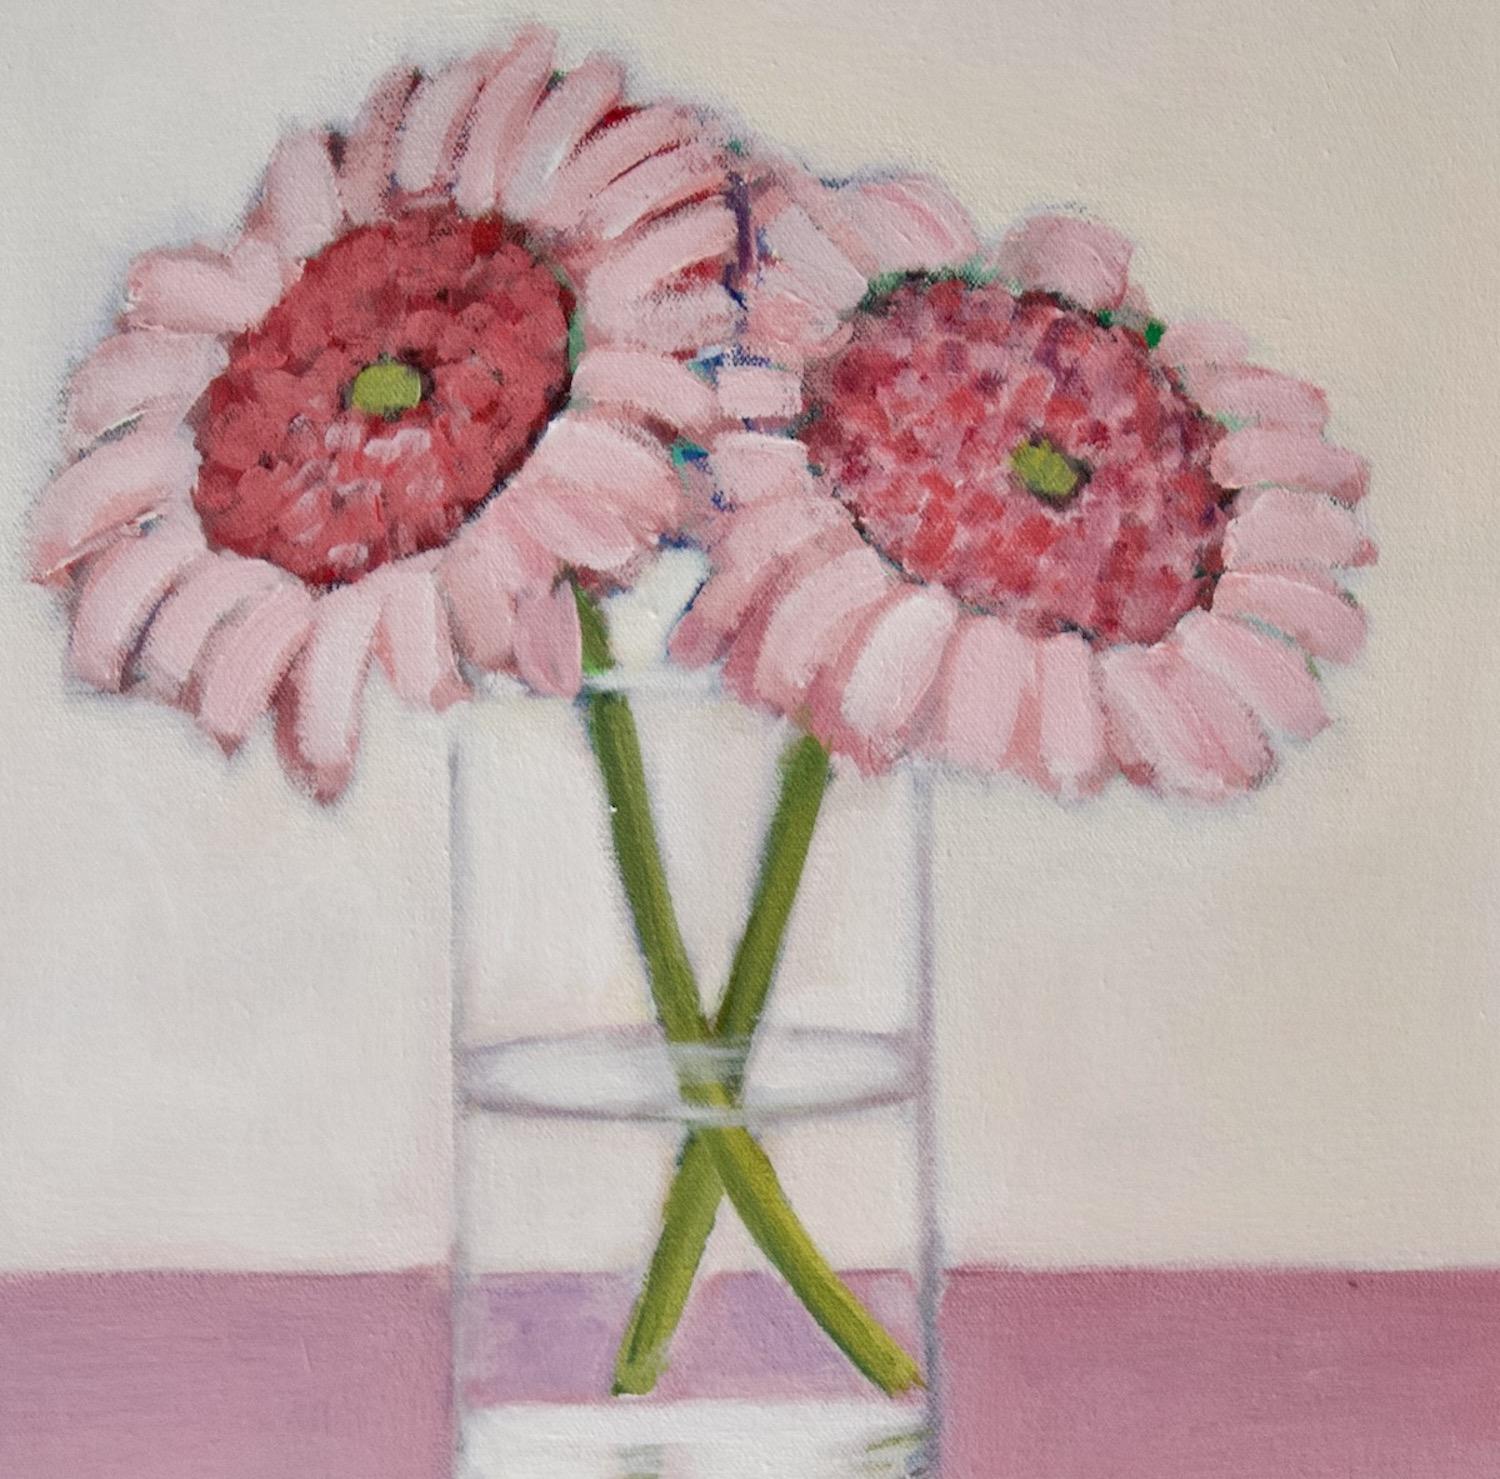 <p>Artist Comments<br>Artist Carey Parks paints two pink flowers in a glass vase. Her impressionist style depicts the petals with a soft velvety feel. The oversized nature of the blooms balances the entire composition in contrast to its vessel.